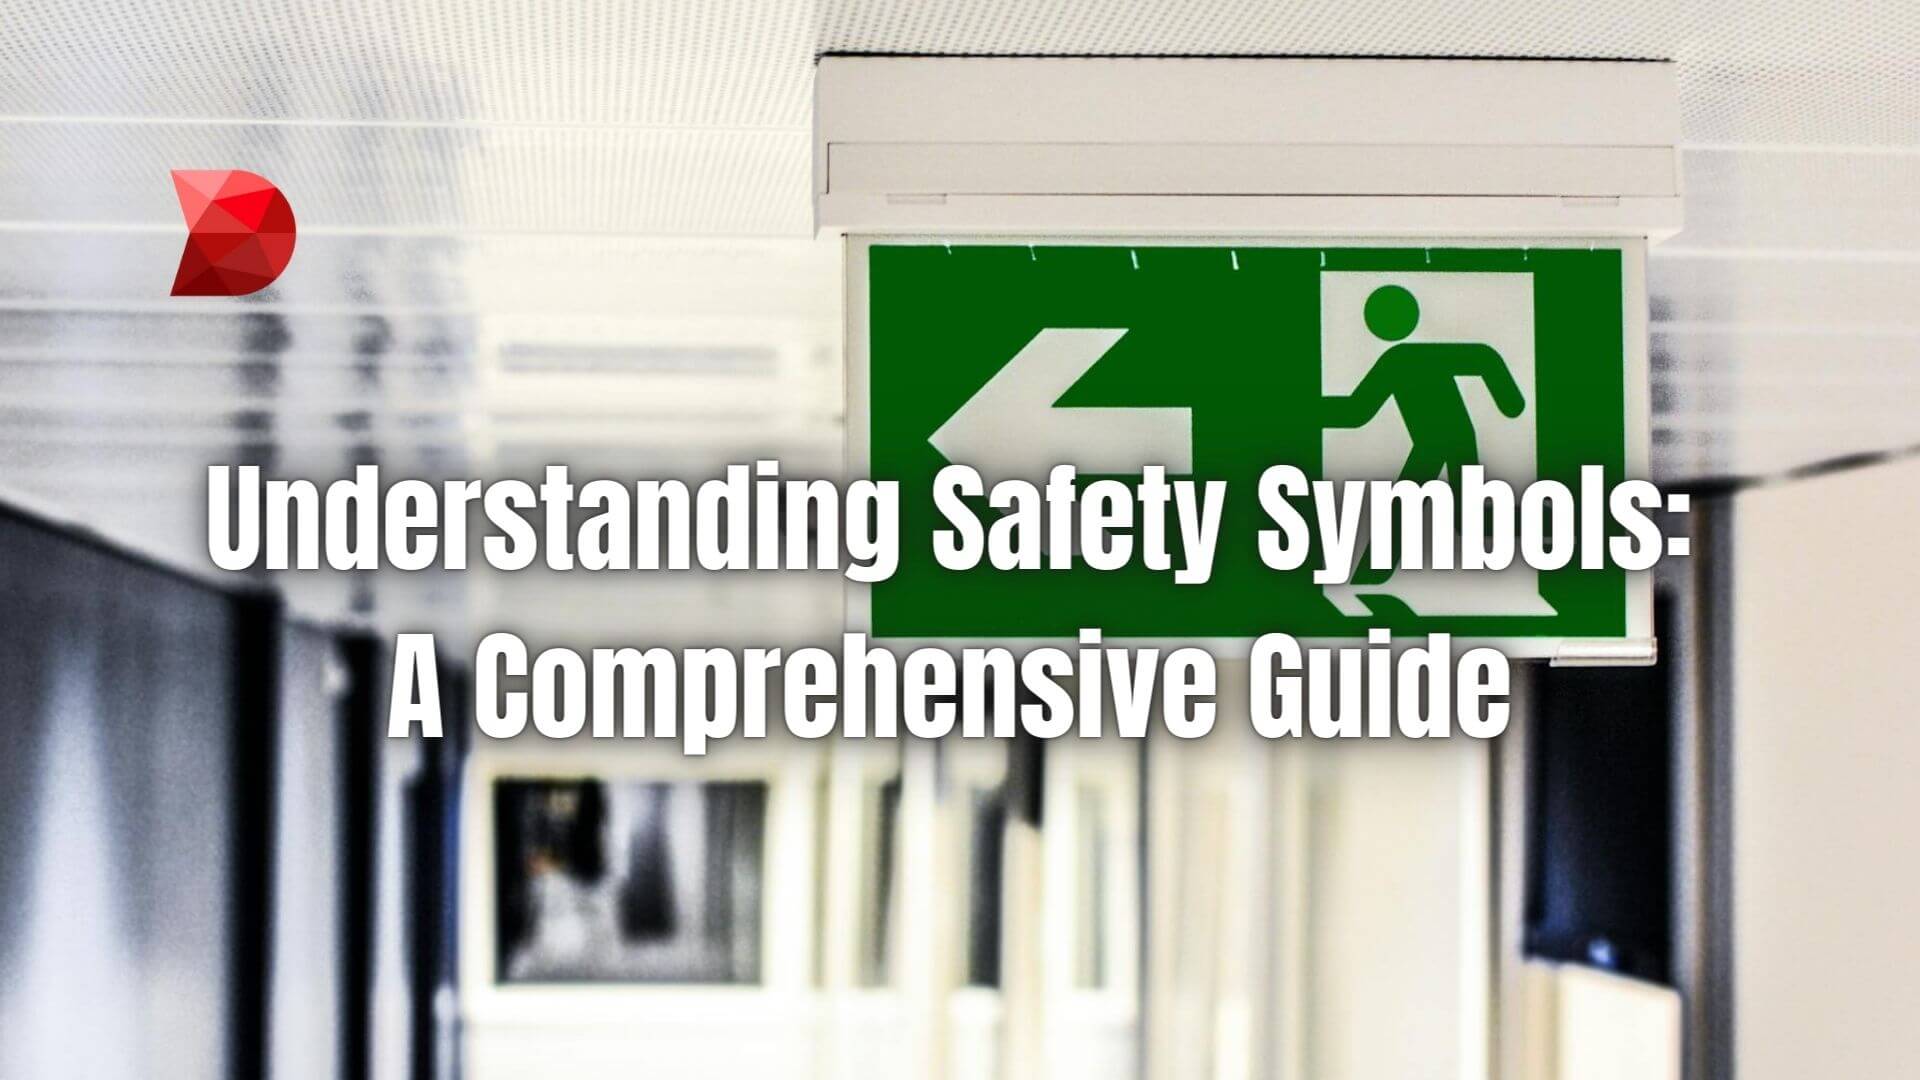 Unlock the secrets of safety symbols with our comprehensive guide. Learn their meanings and importance for a safer workplace.